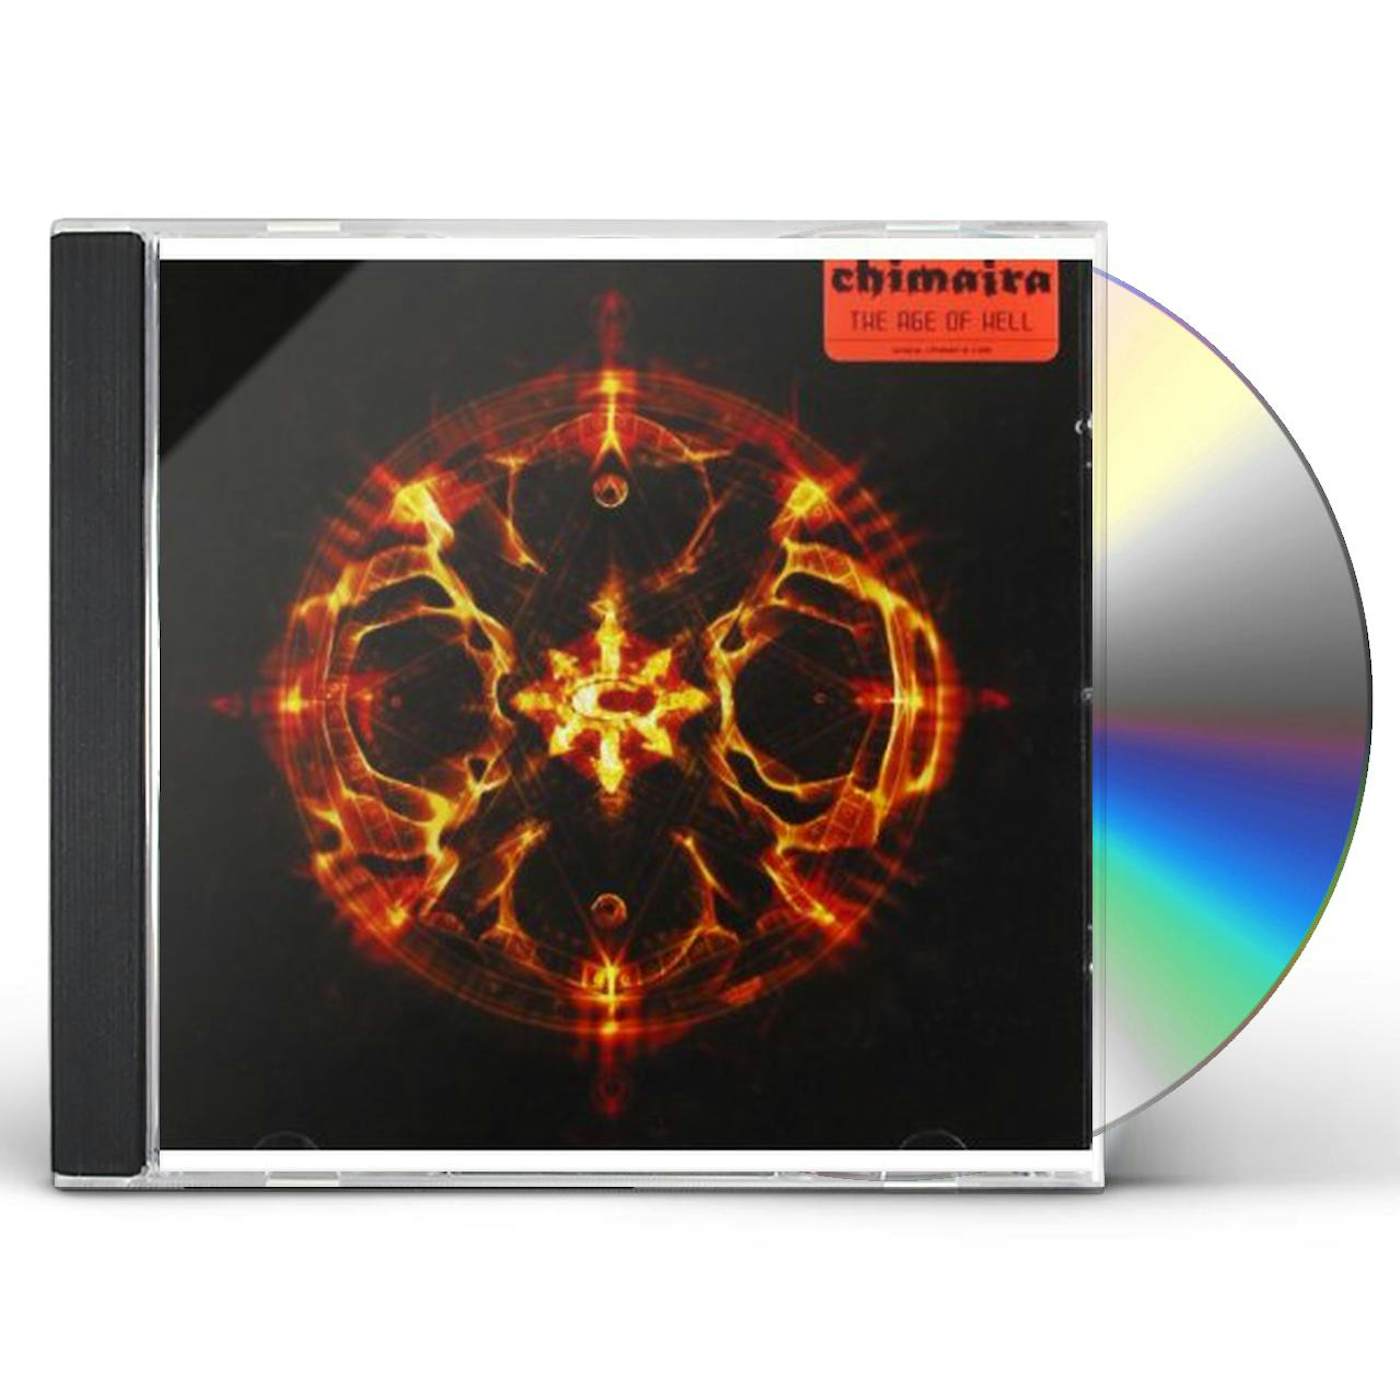 Chimaira AGE OF HELL CD